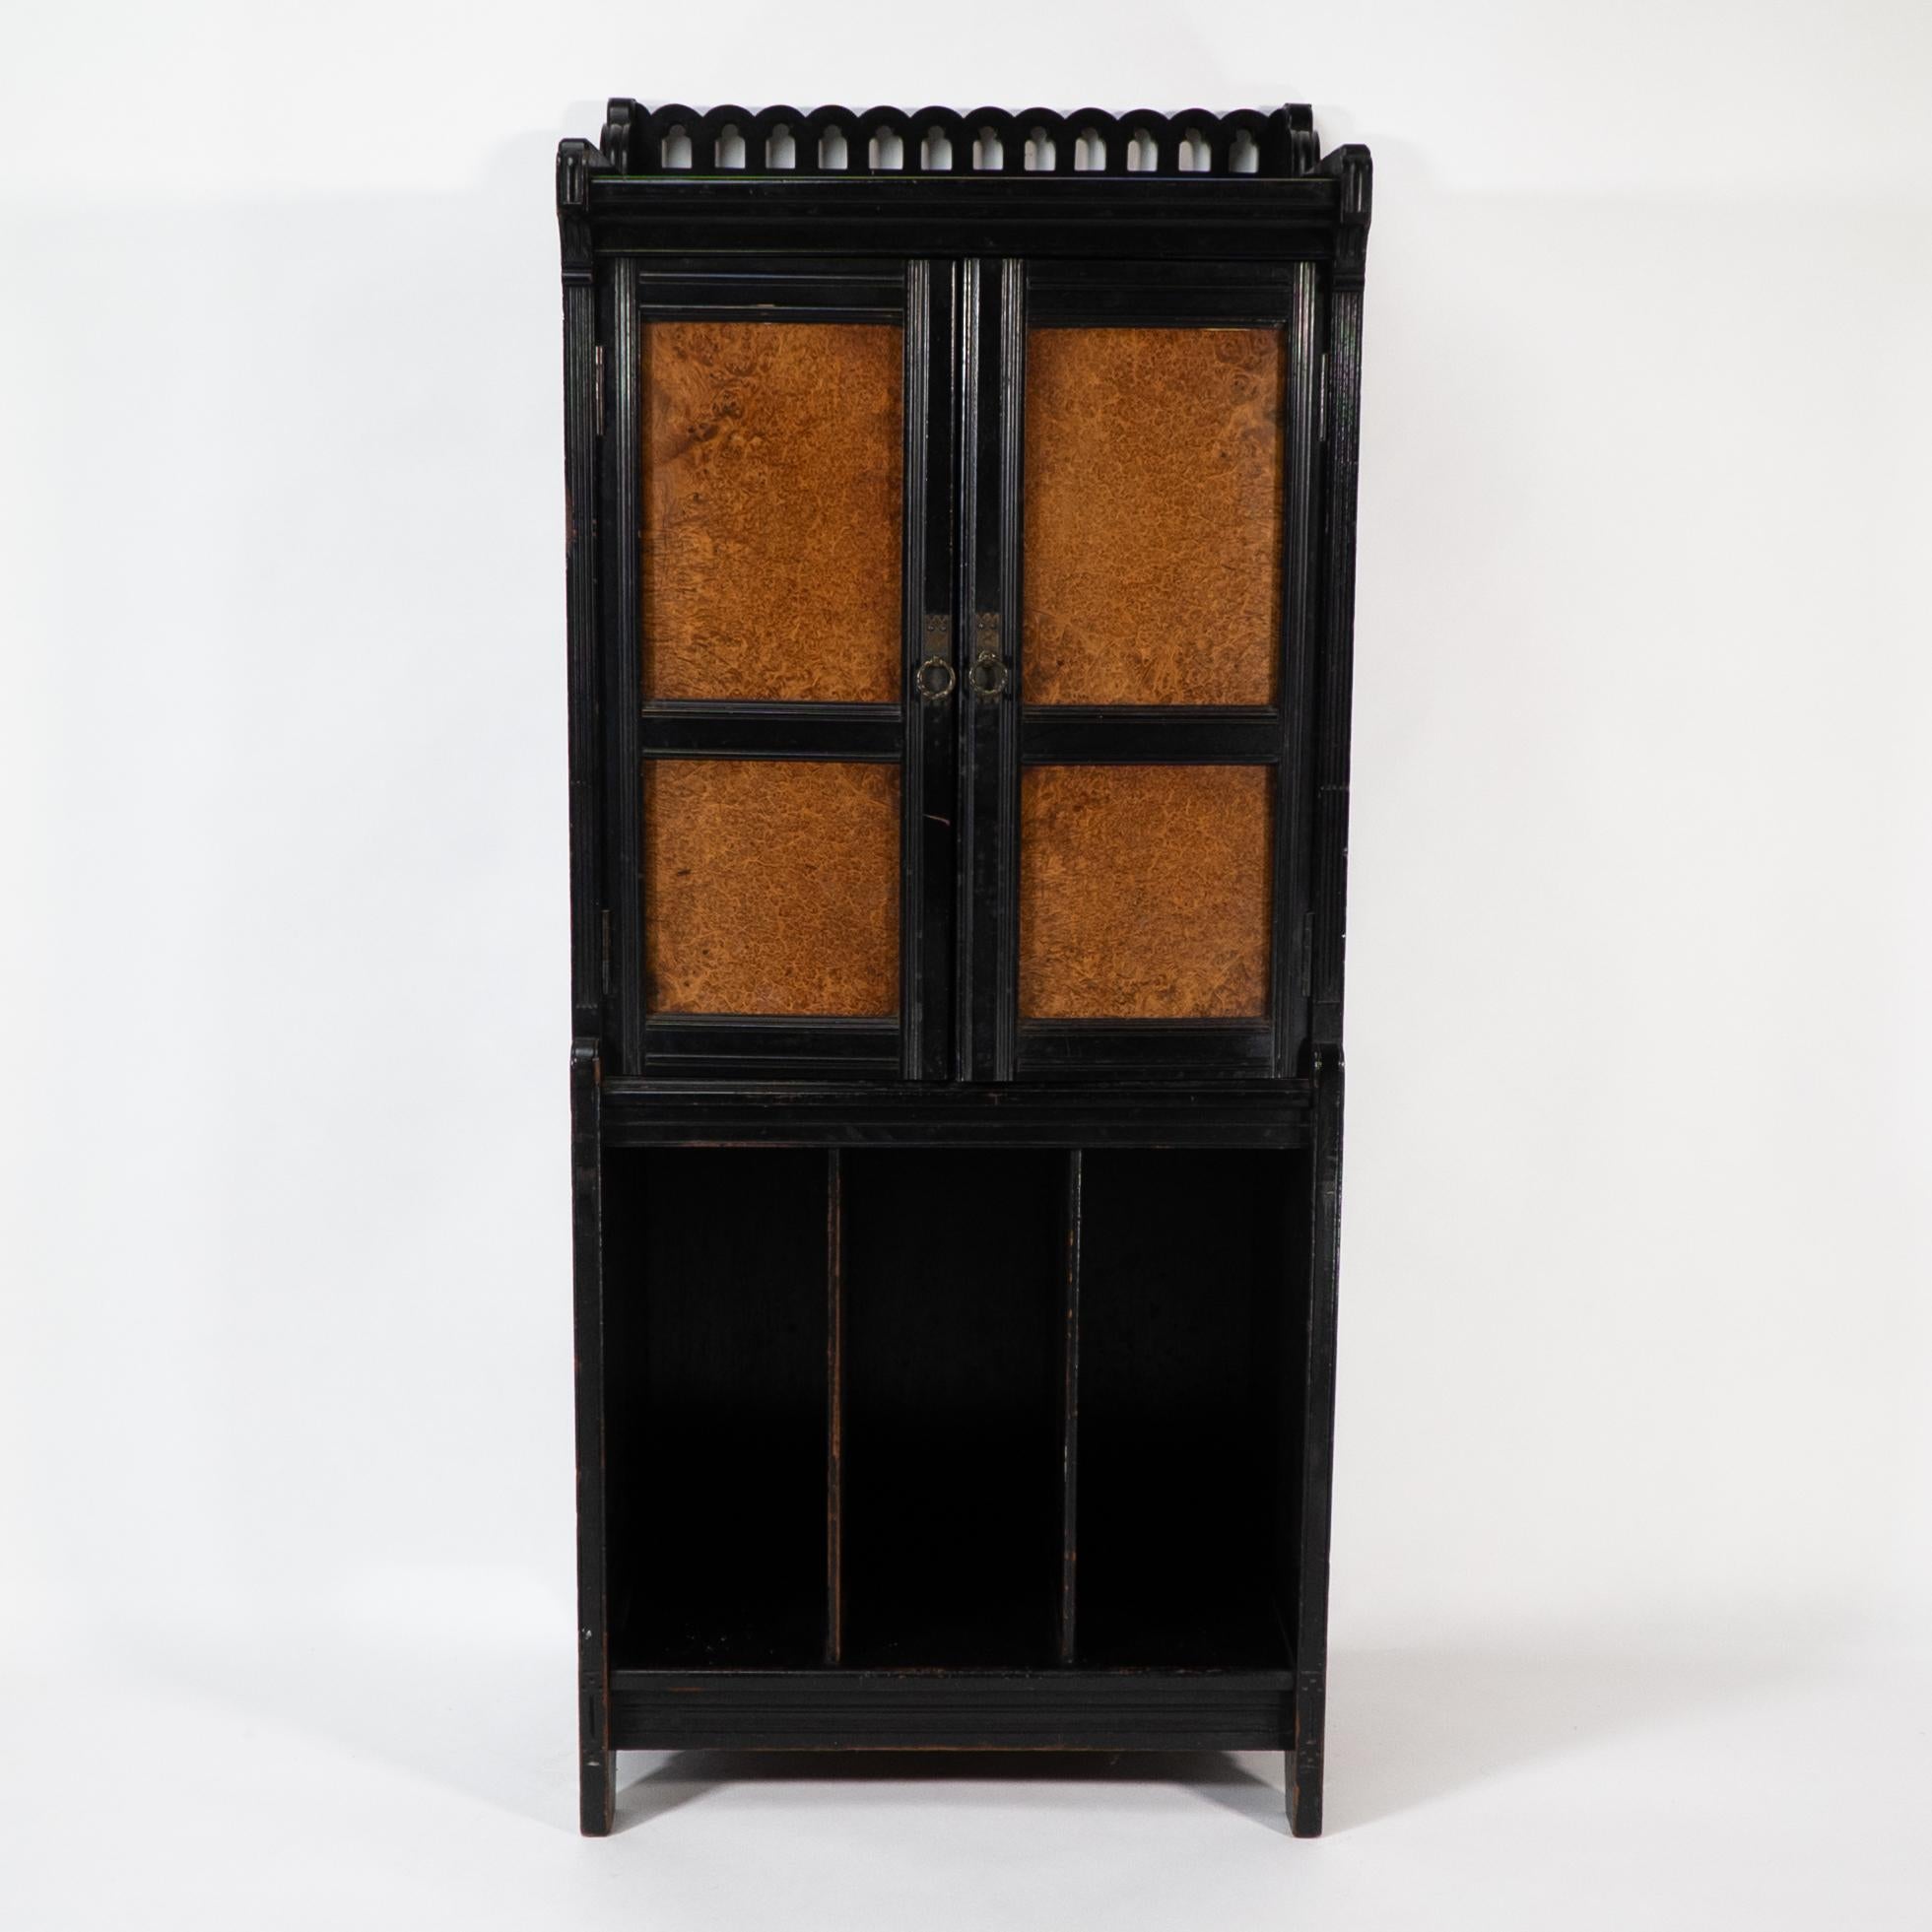 Collinson and Walton. A rare Aesthetic Movement ebonized music cabinet with pierced gallery to the top, wild burr walnut panels to the doors which open to reveal sheet music slides, with castellated brass backplates etched with fleur de lys and